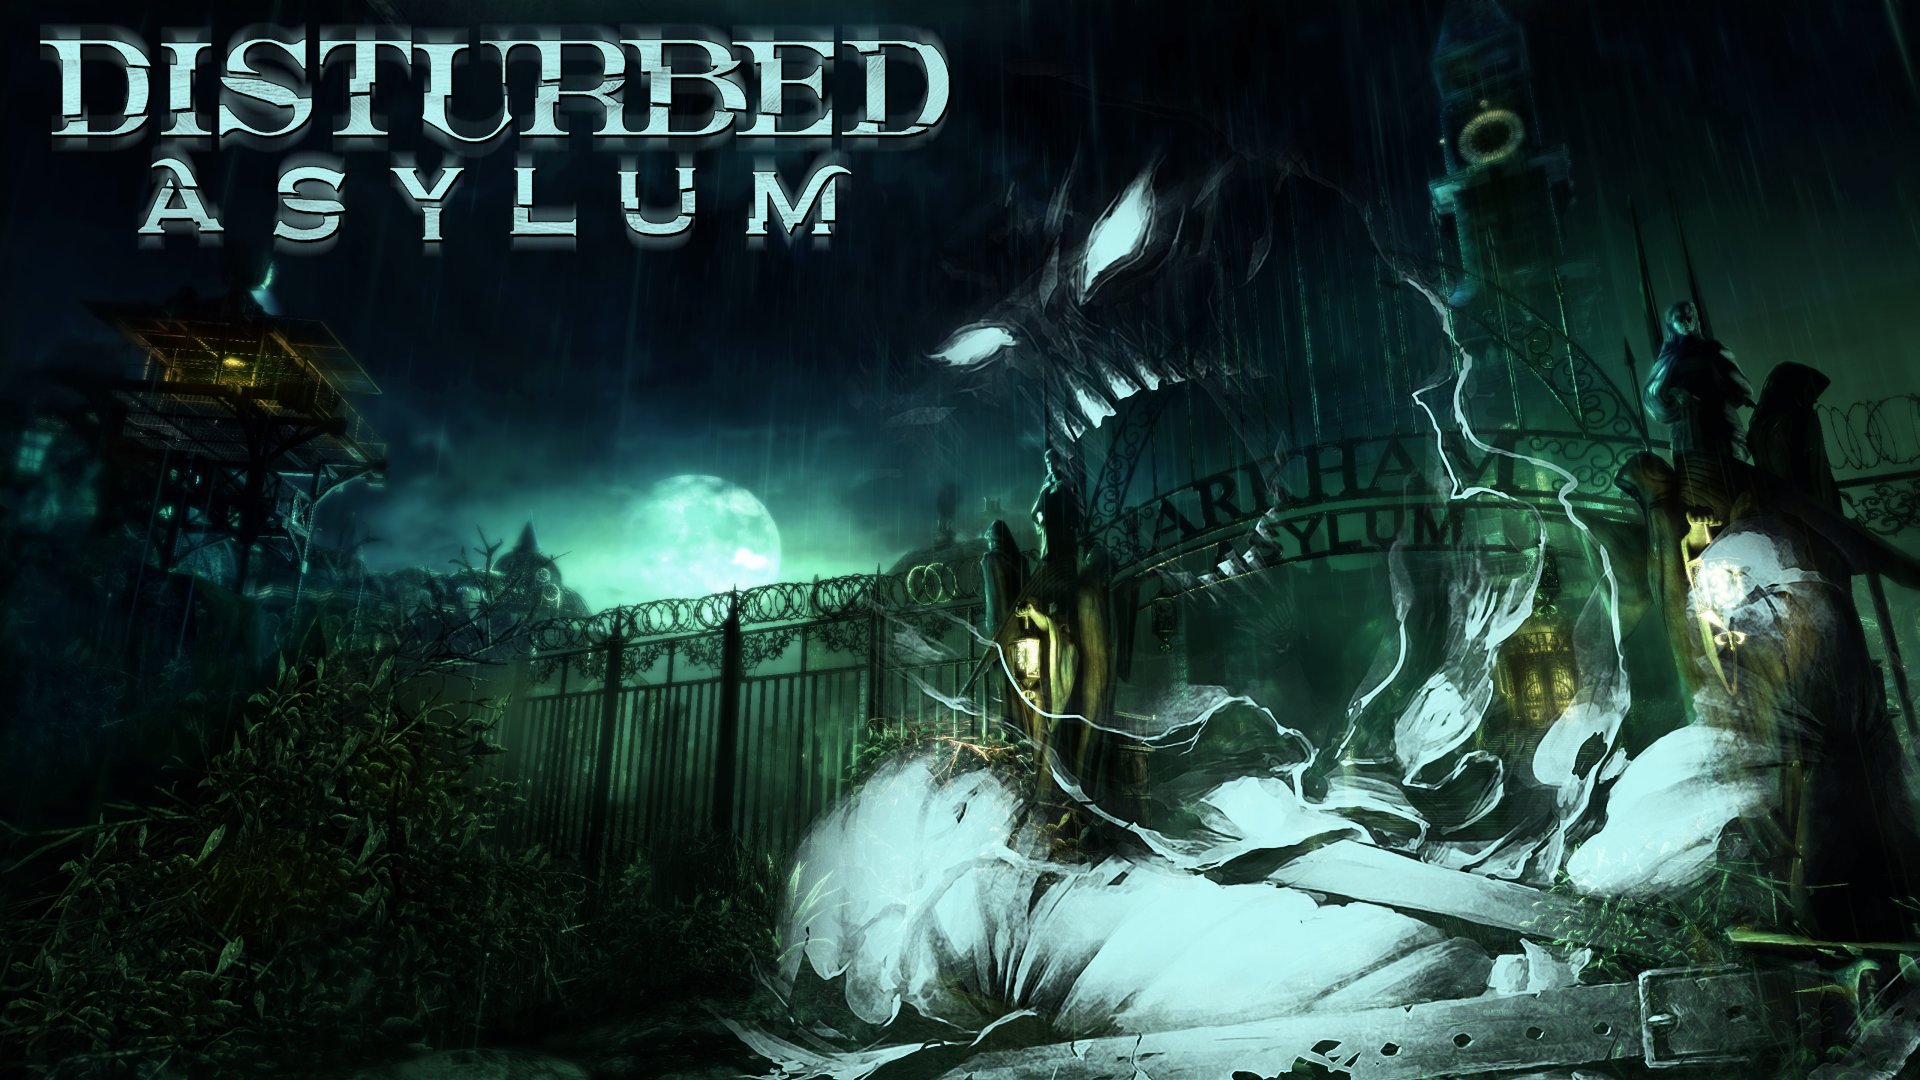 Music Disturbed HD Wallpaper | Background Image